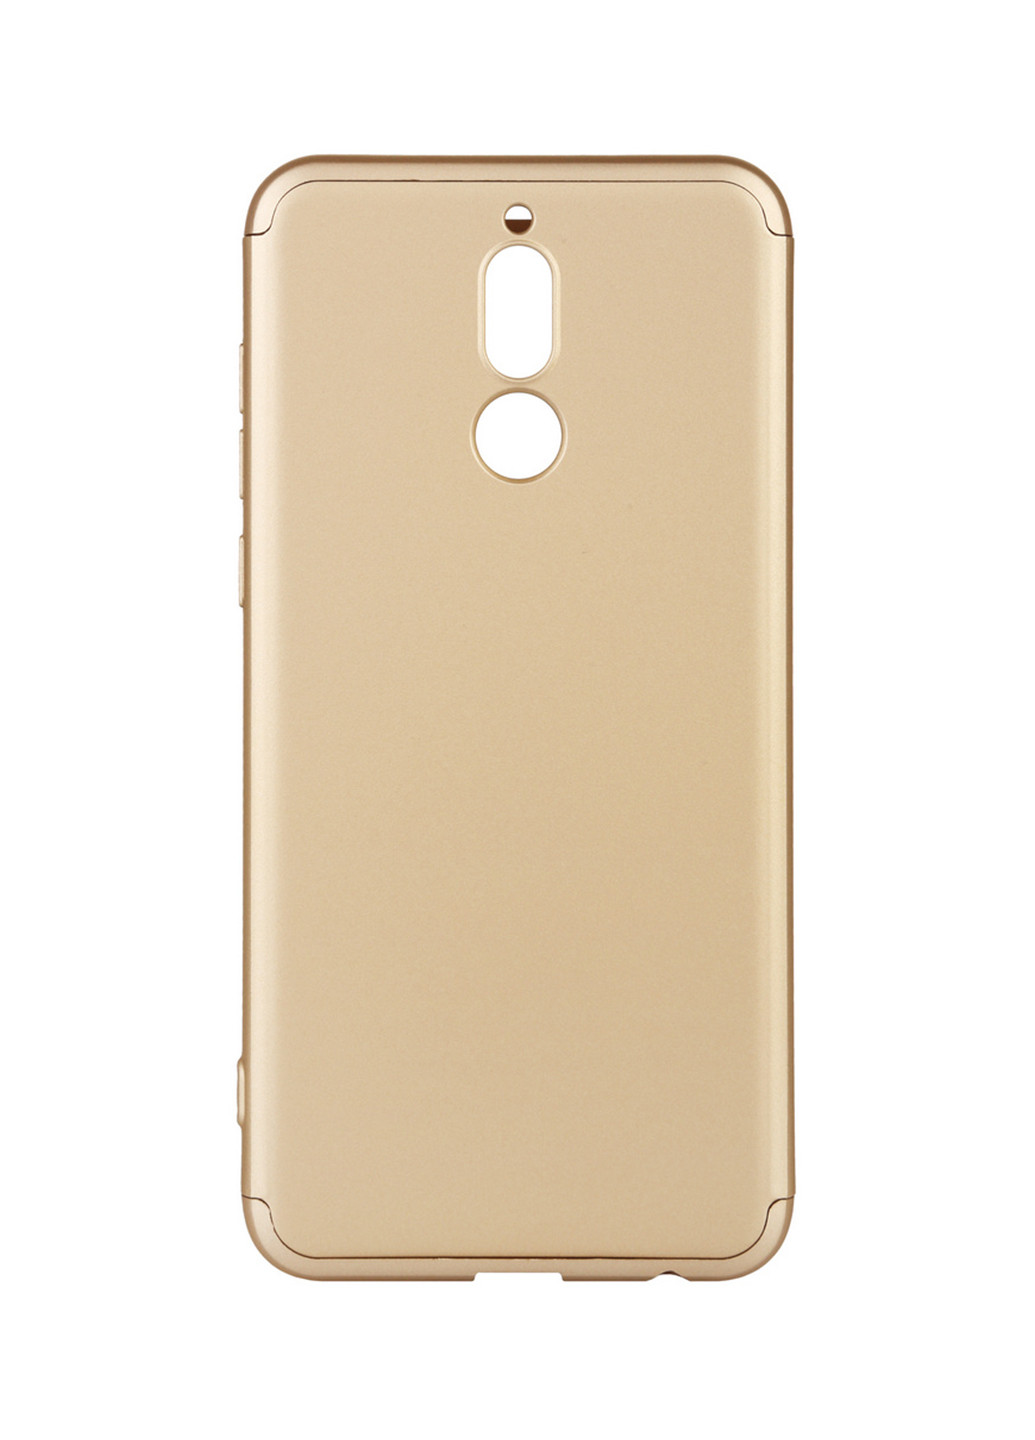 Панель Super-protect Series для Huawei Mate 10 Lite Gold (701975) BeCover super-protect series для huawei mate 10 lite gold (701975) (145630588)